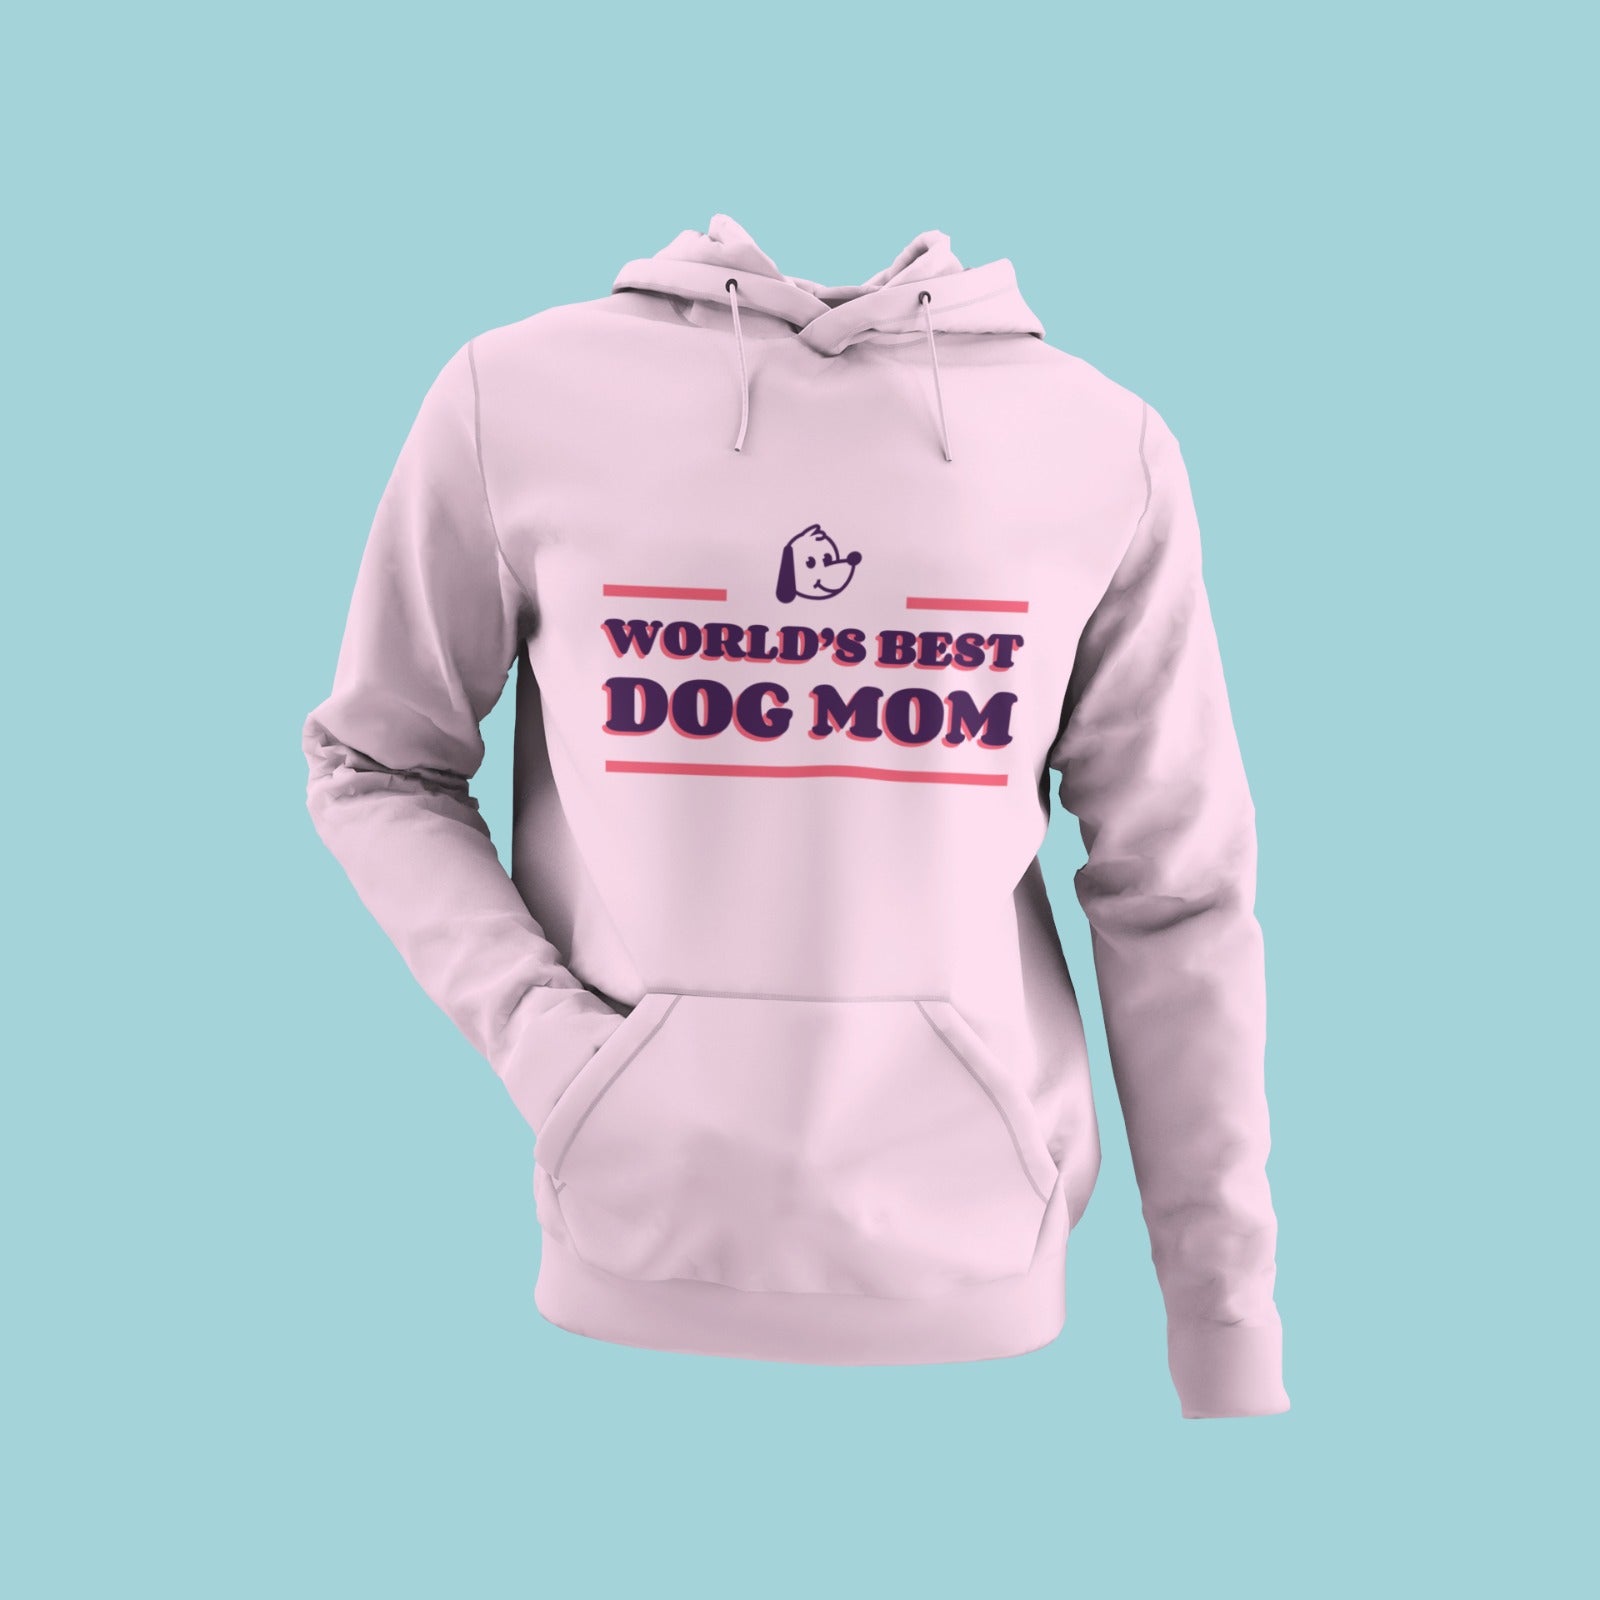 Show your love for your furry friend with our baby pink hoodie! Featuring the title 'World's Best Dog Mom' and a cute dog face image, this hoodie is perfect for all dog moms out there. Stay cozy and stylish while showing your love for your fur baby. Get yours today!